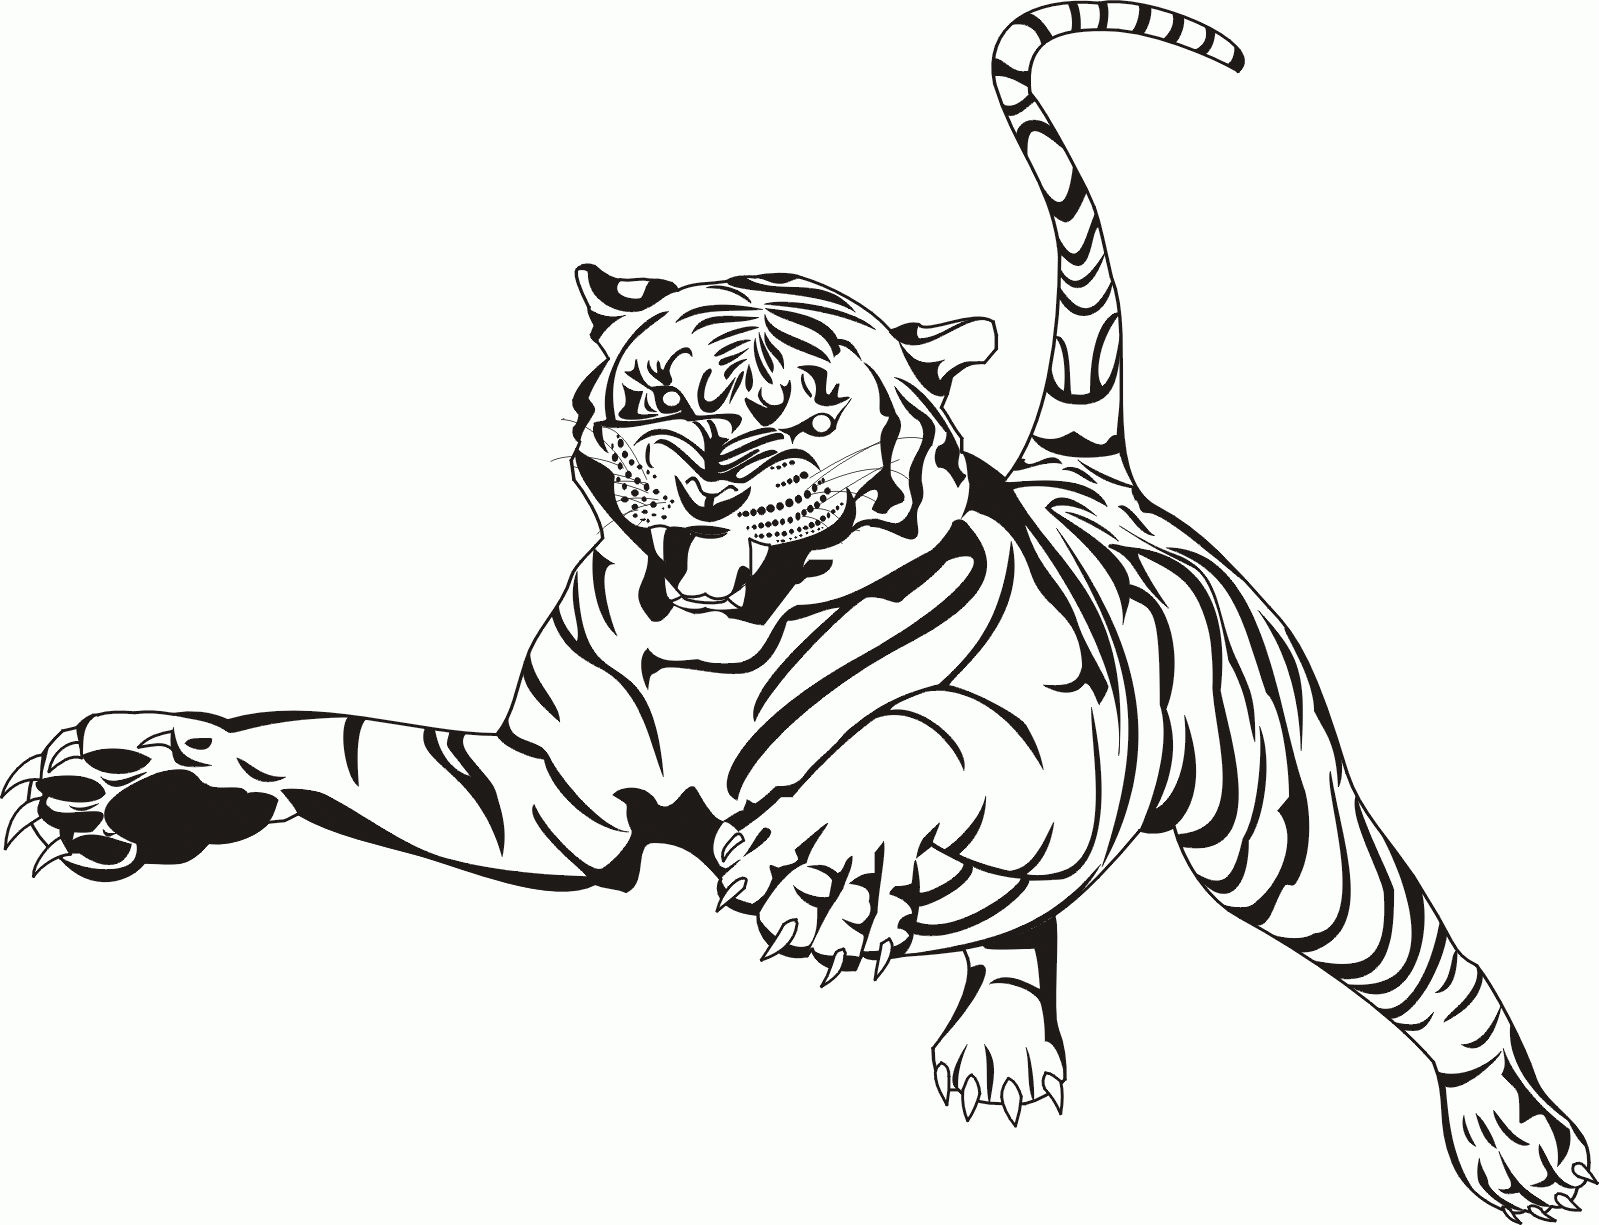 tiger-coloring-page-0053-q1